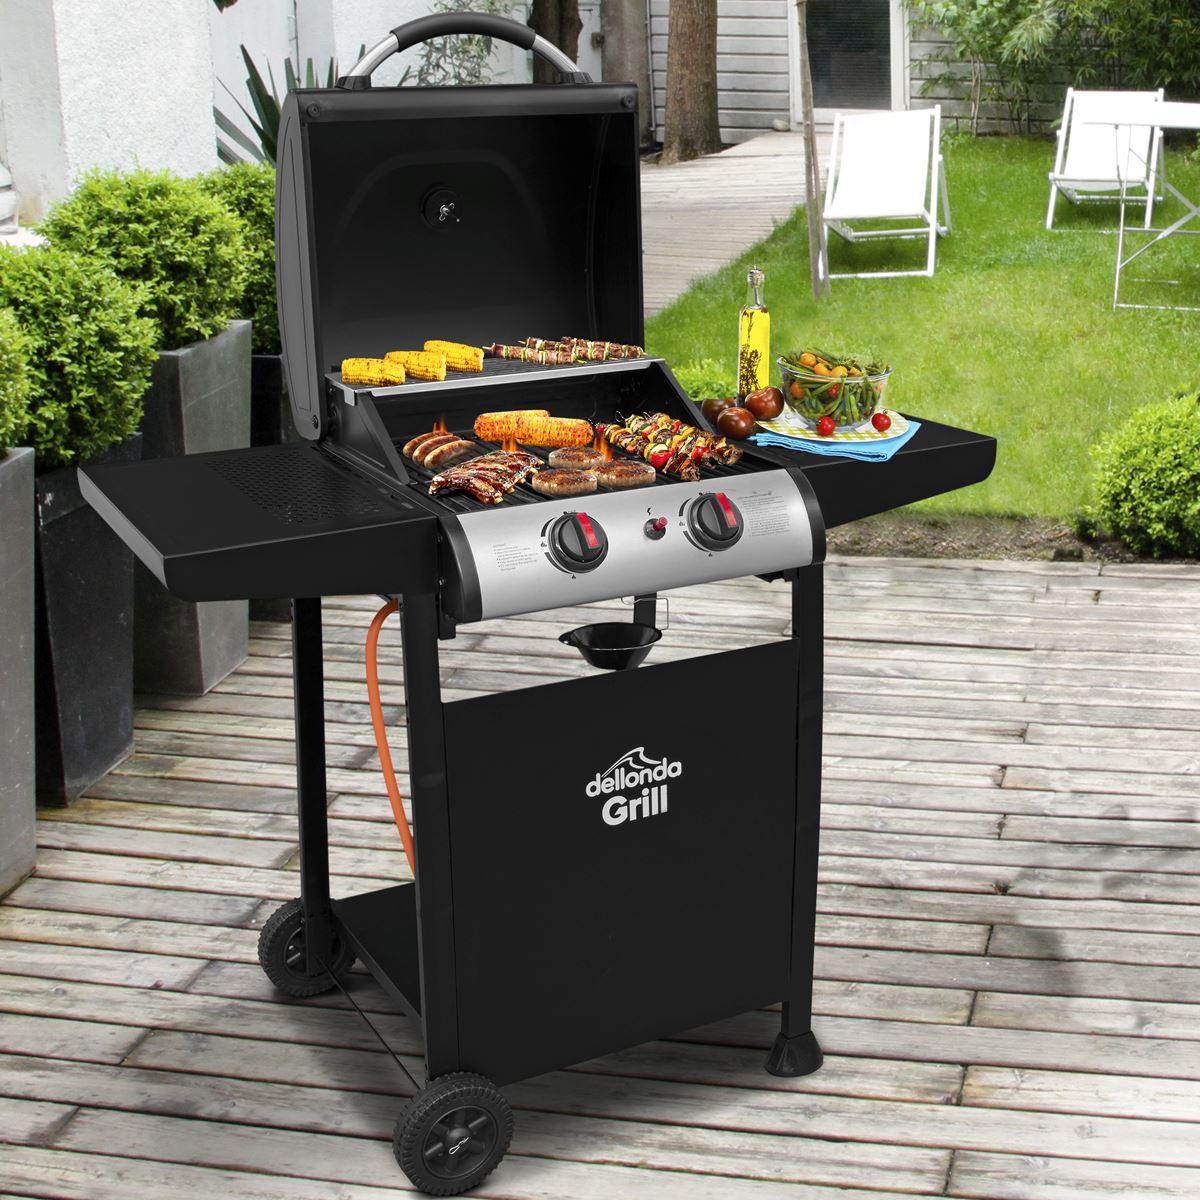 Dellonda 2 Burner Gas BBQ Grill with Ignition & Thermometer - Black/Stainless Steel DG13 - Tools 2U Direct SW